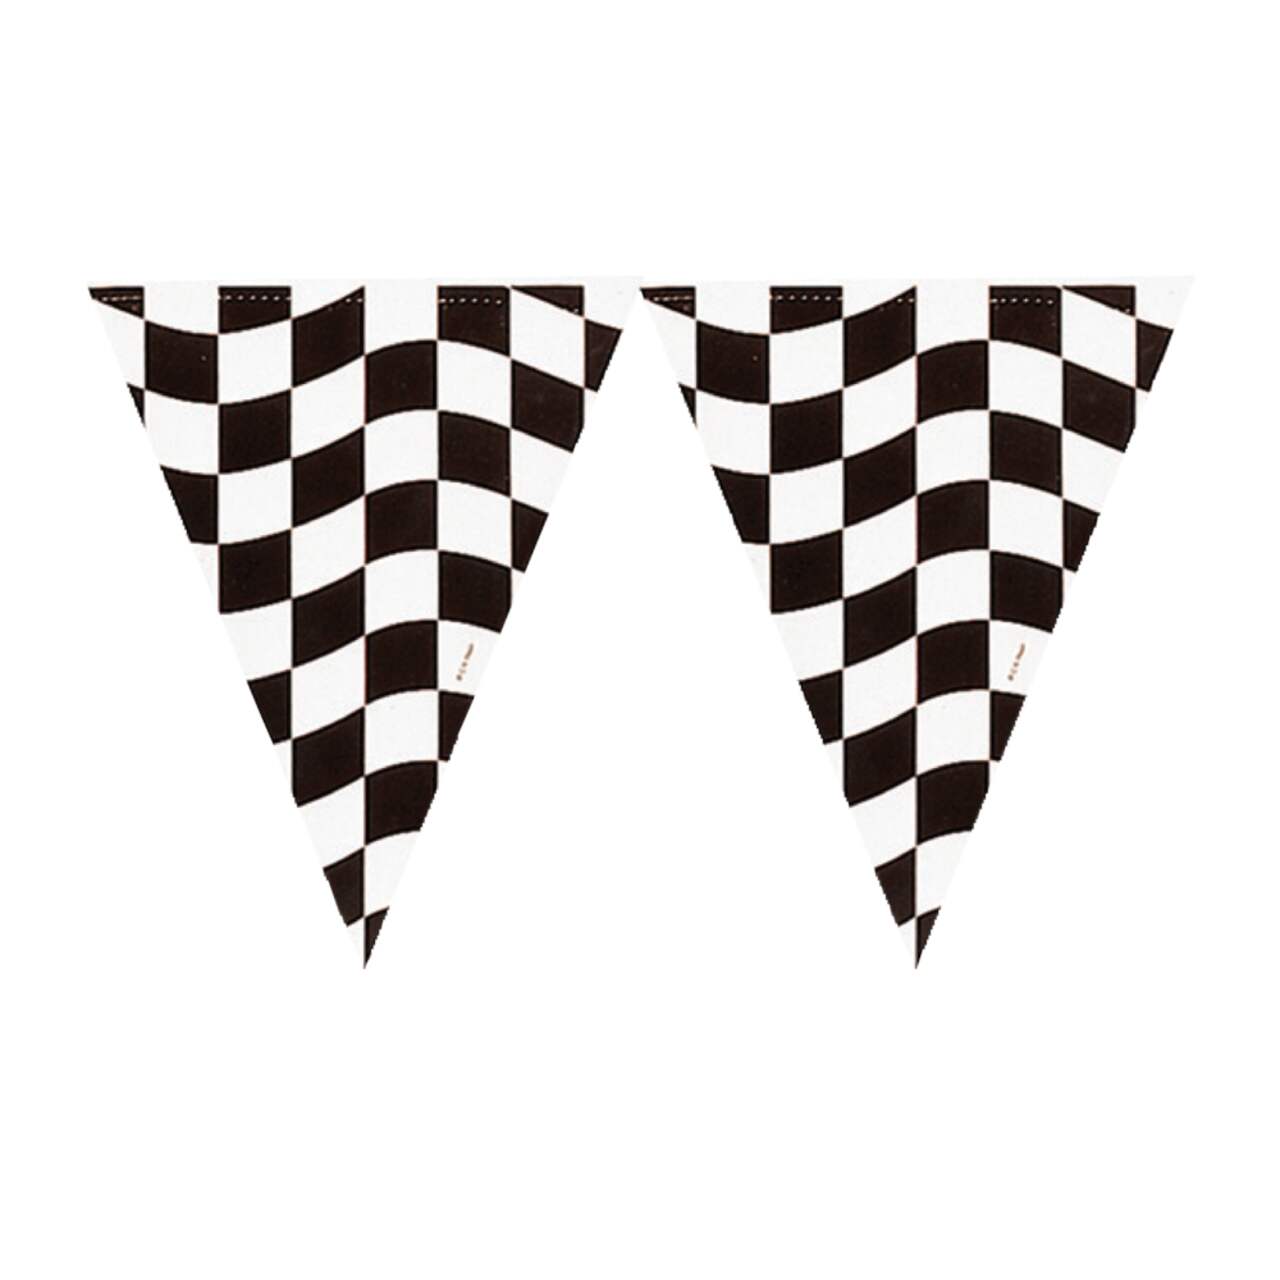 Black And White Checkered Flags